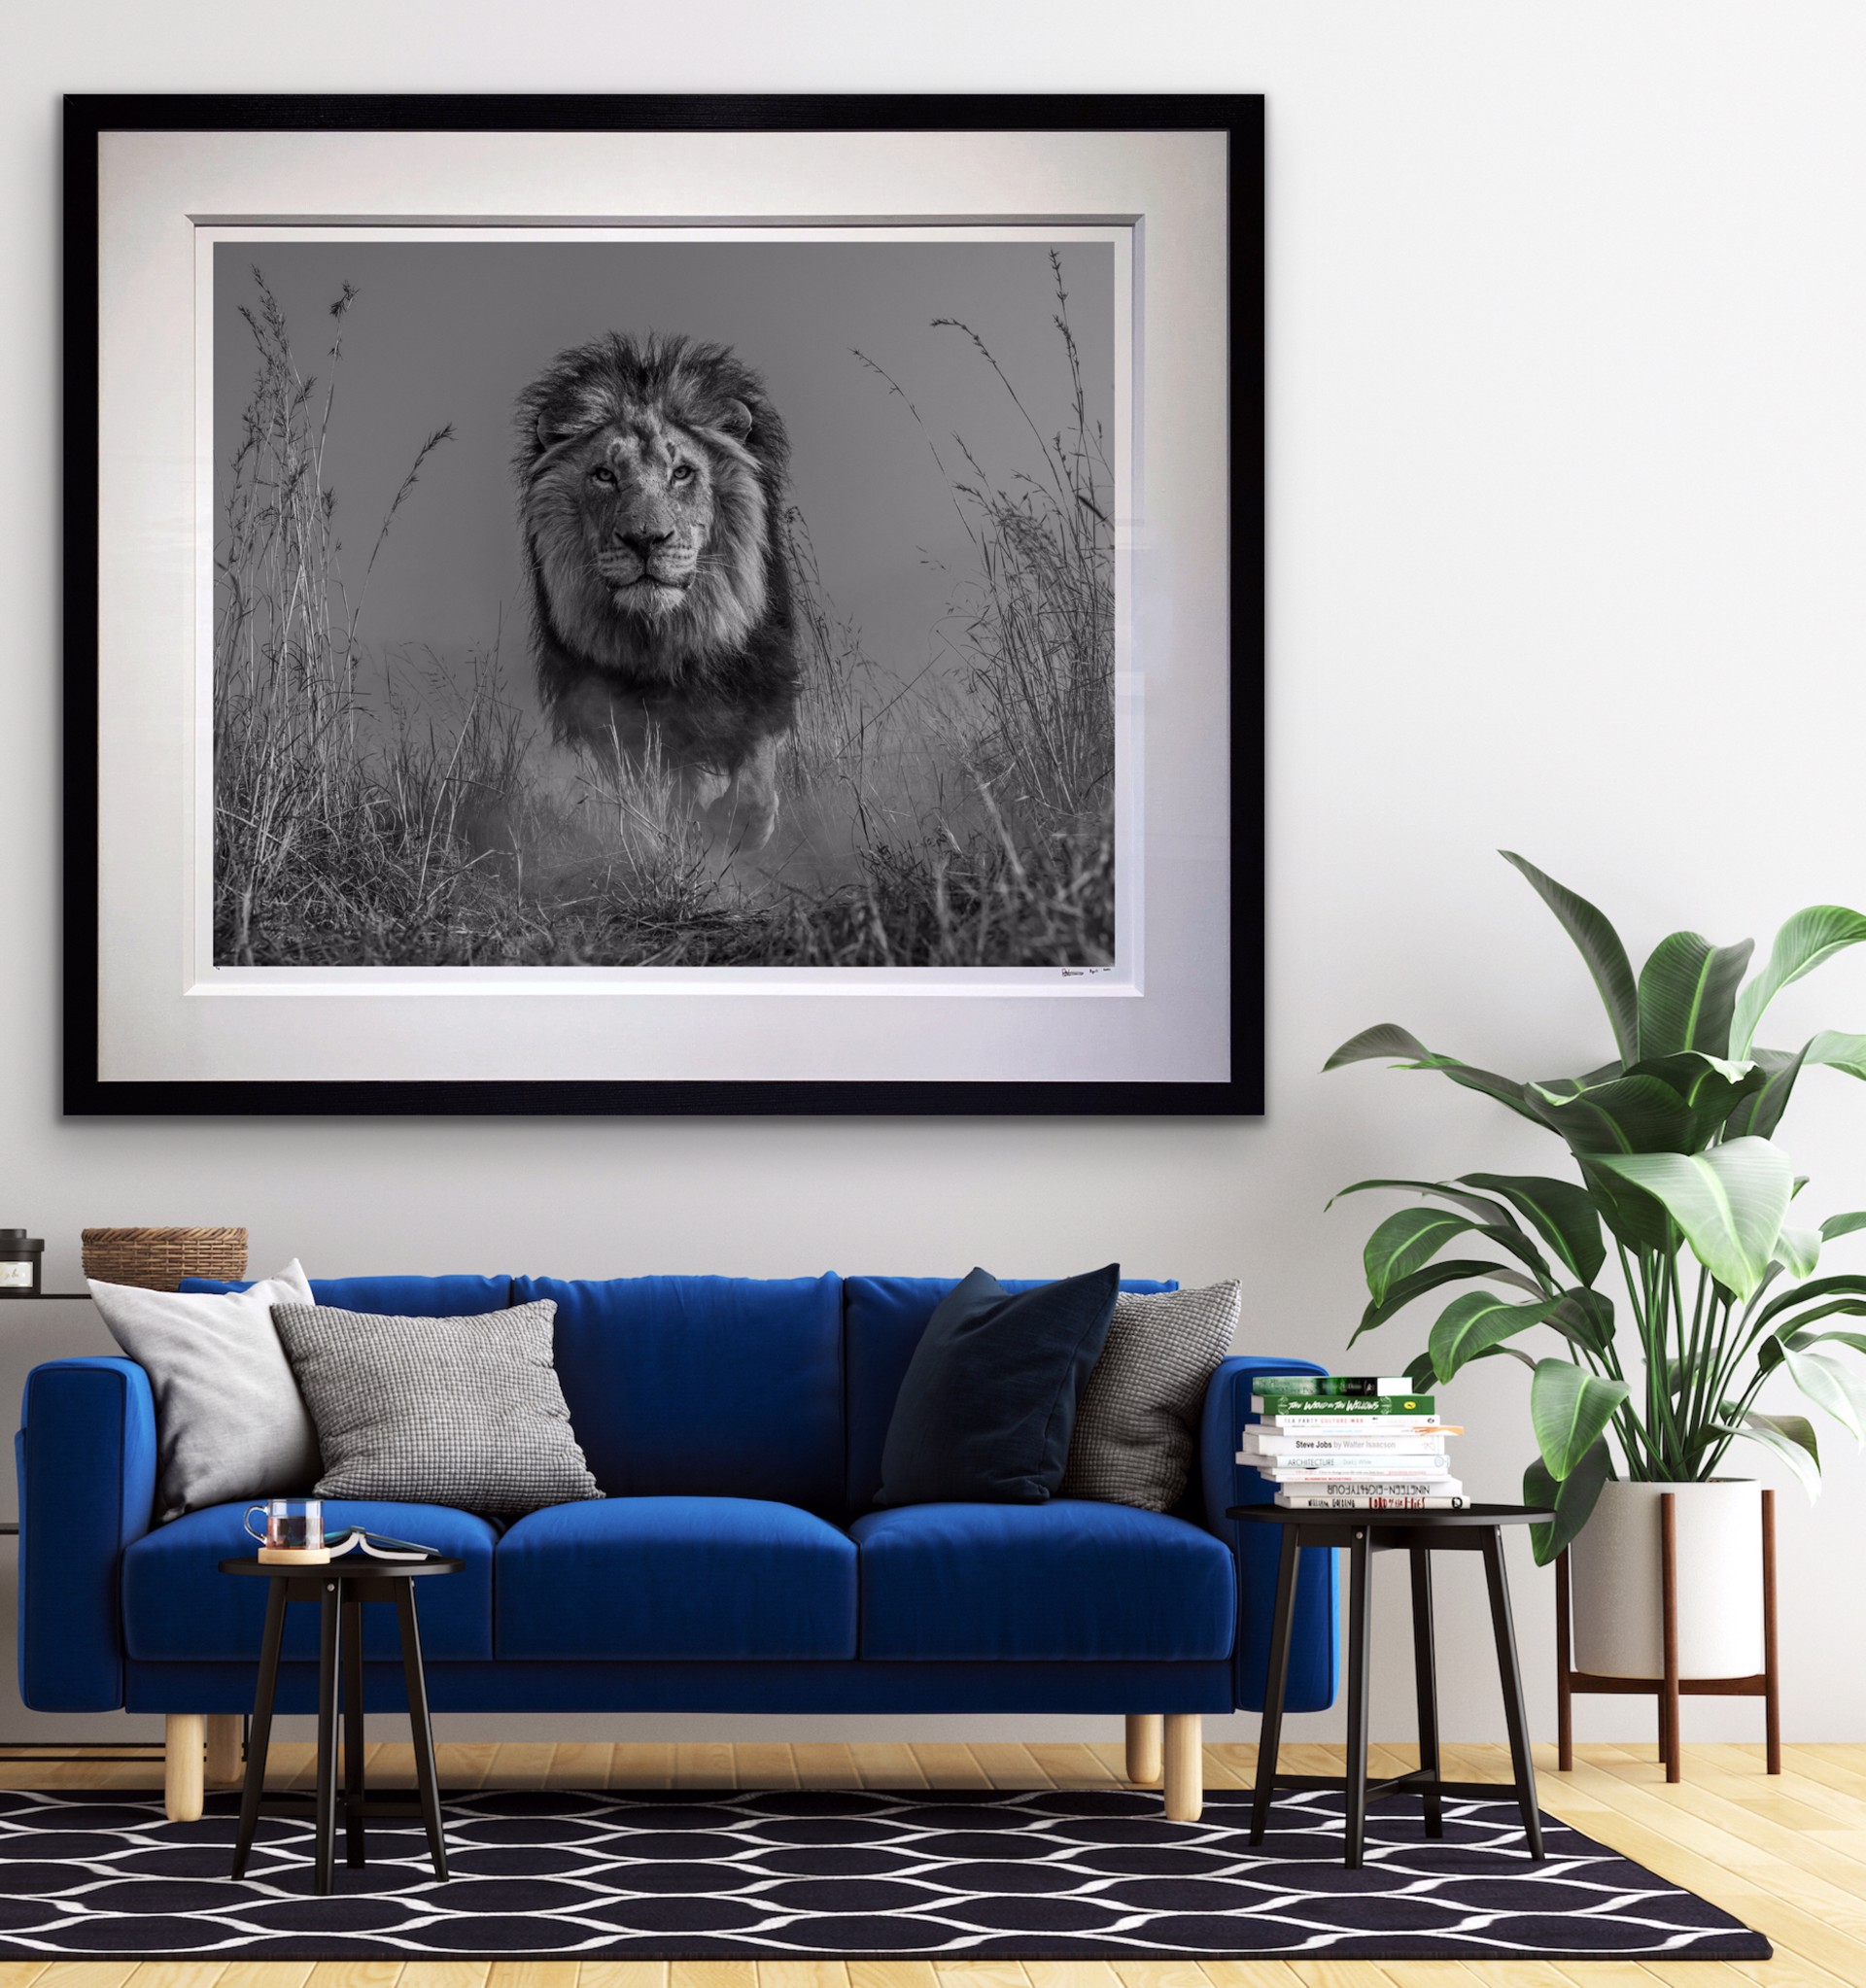 The King and I by David Yarrow